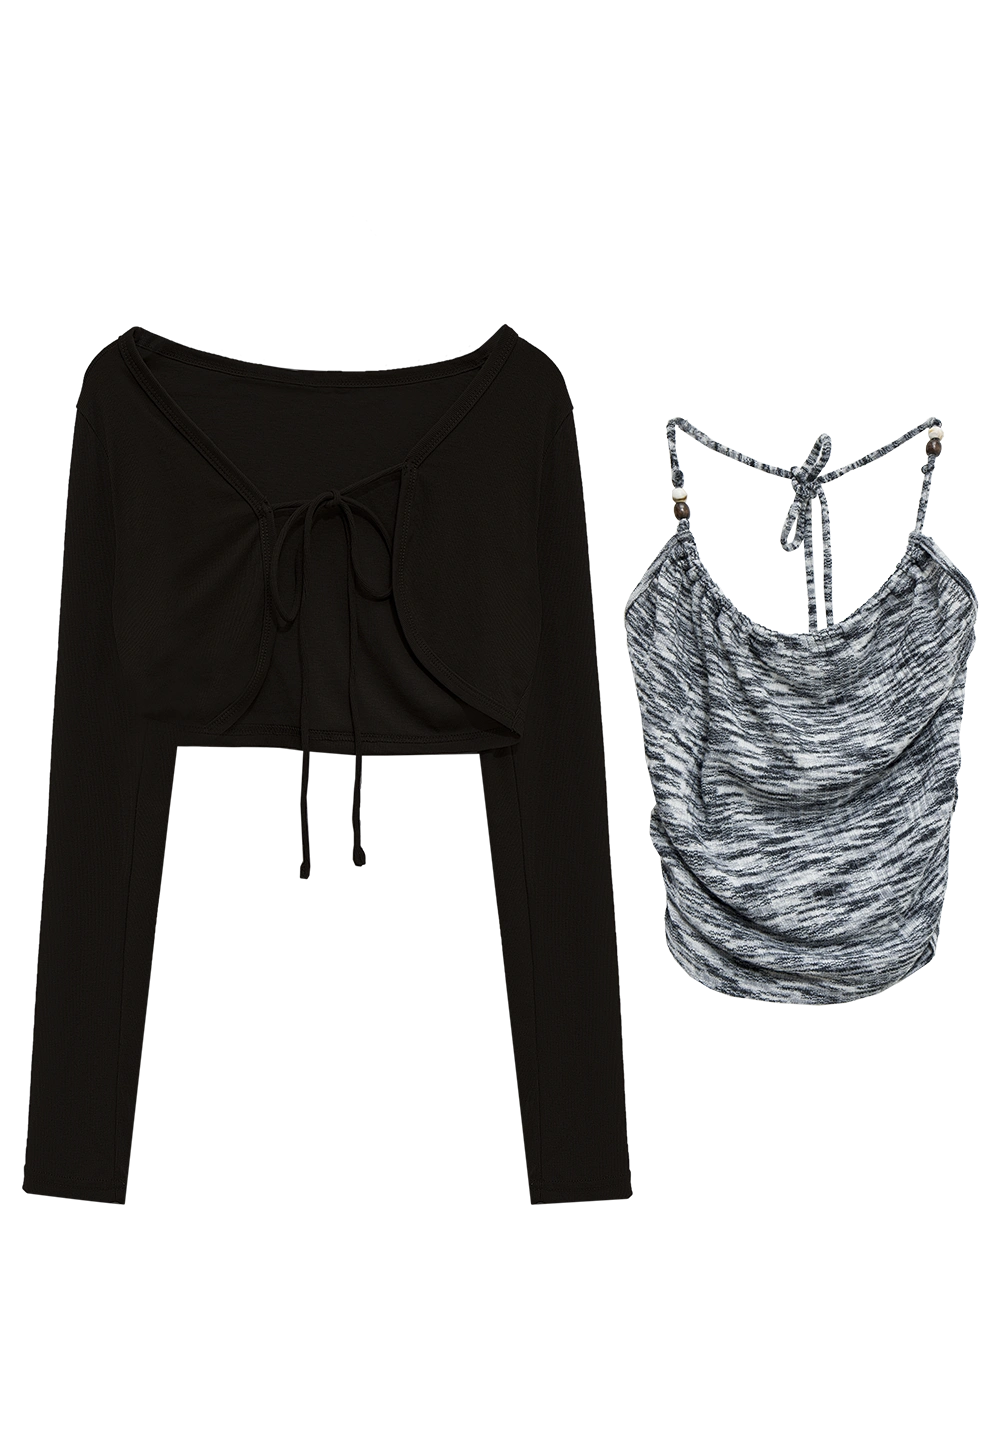 Drawstring Cropped Cardigan and Beaded Camisole